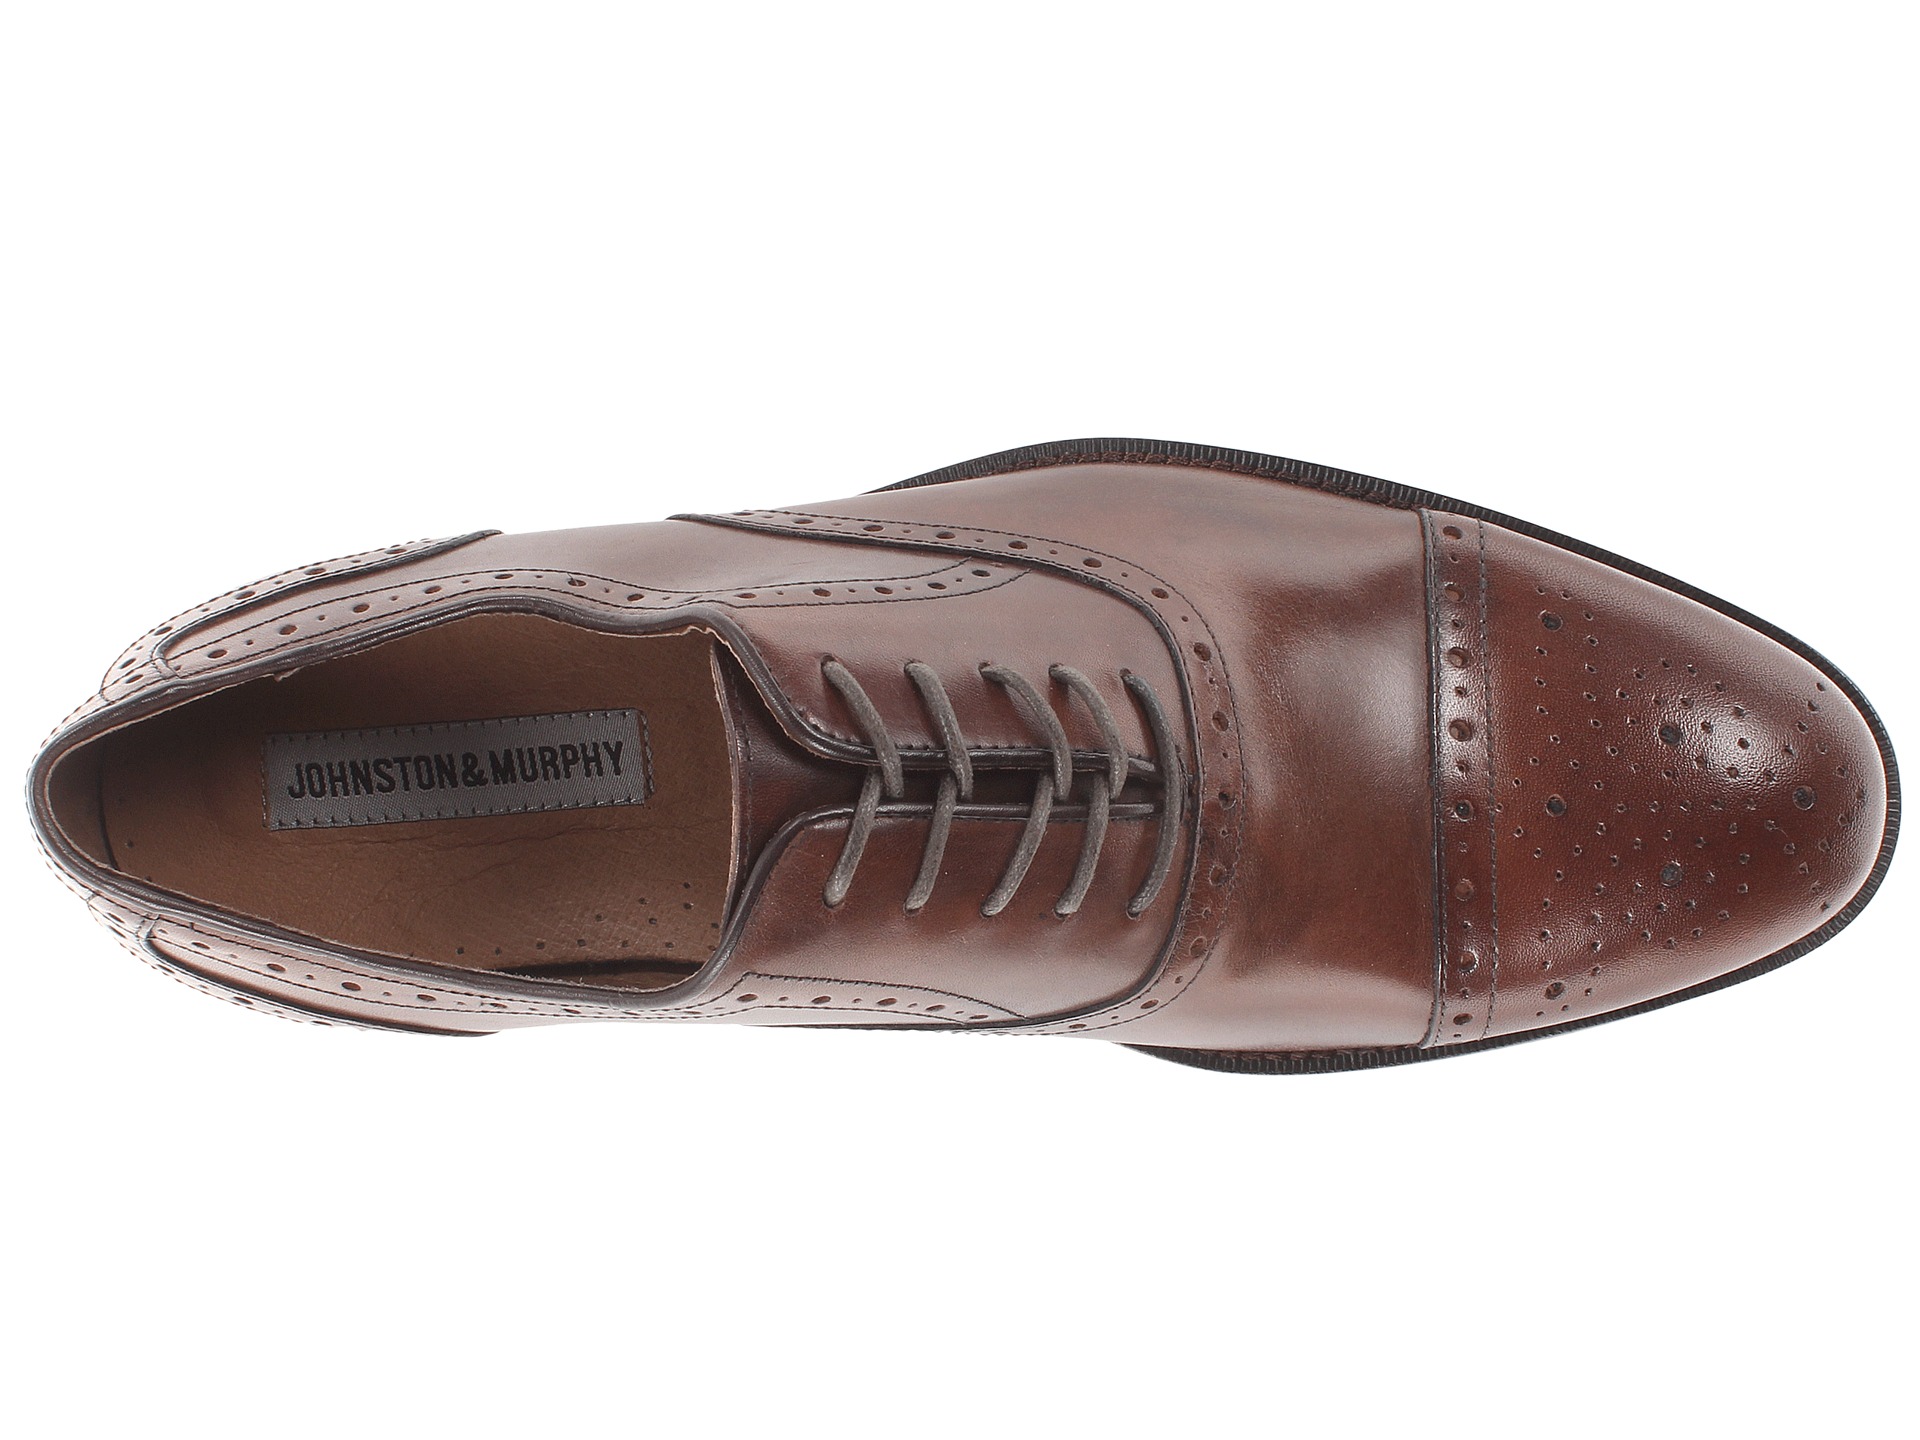 Johnston Murphy Tyndall Cap Toe, Shoes | Shipped Free at Zappos